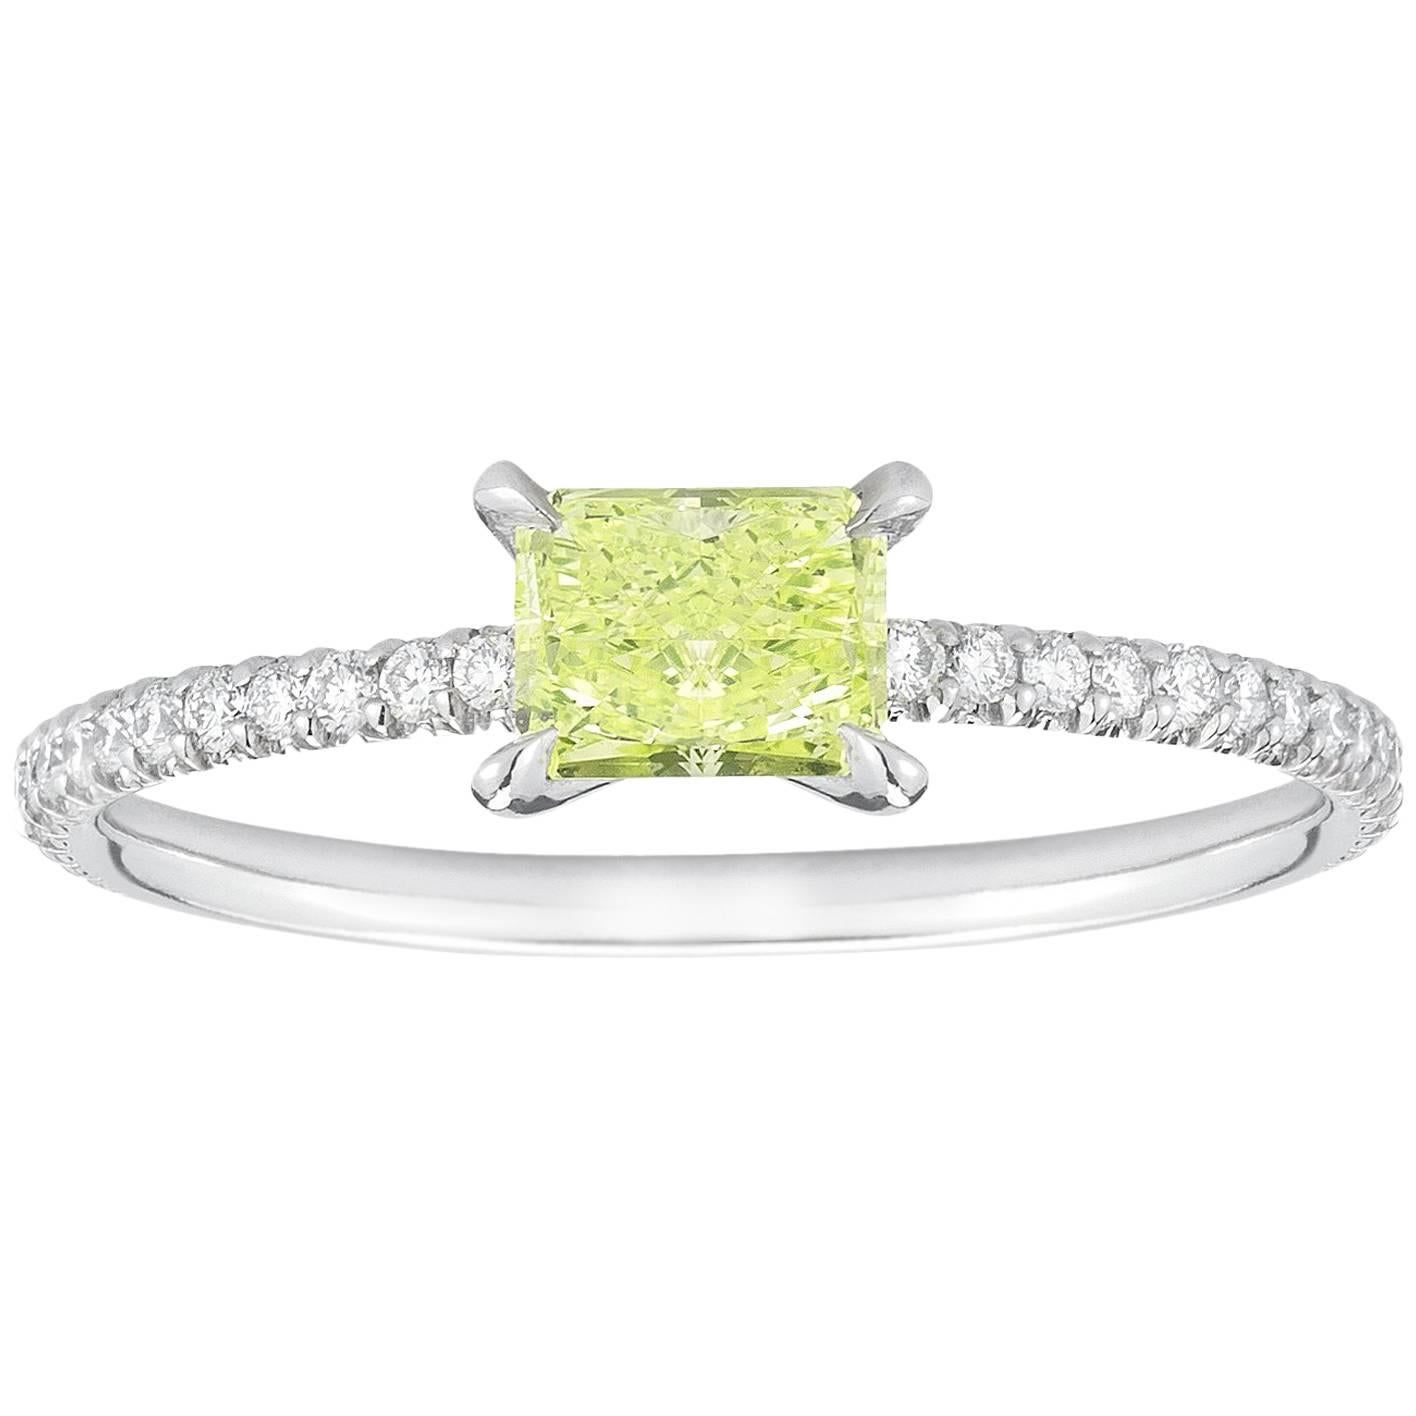 Marisa Perry Micro Pave Fancy Vivid Yellow Green Radiant Diamond Engagement Ring For Sale